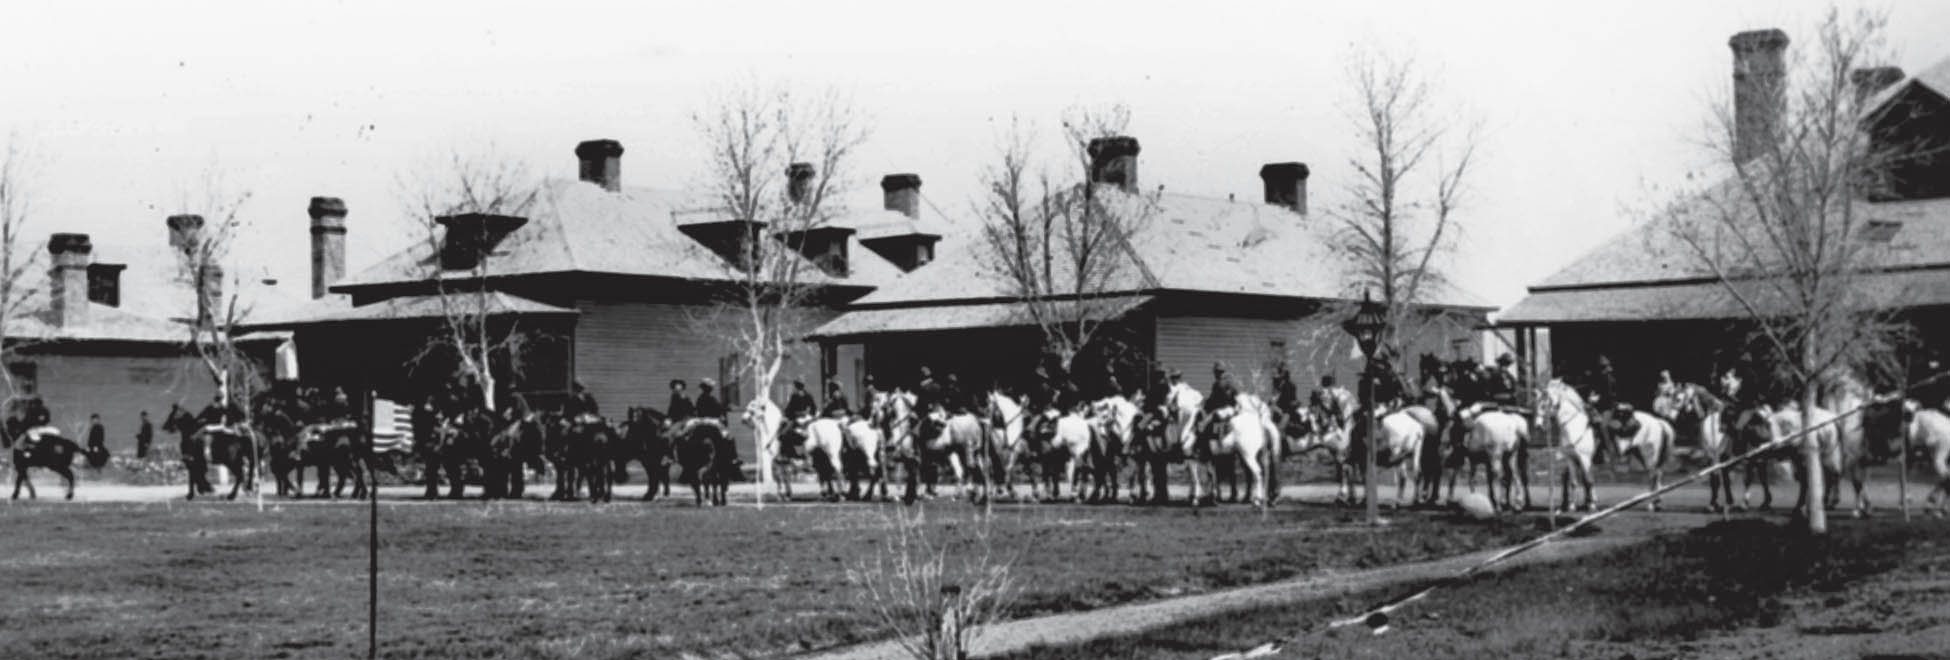 The U.S. Cavalry on Parade at Fort Yates